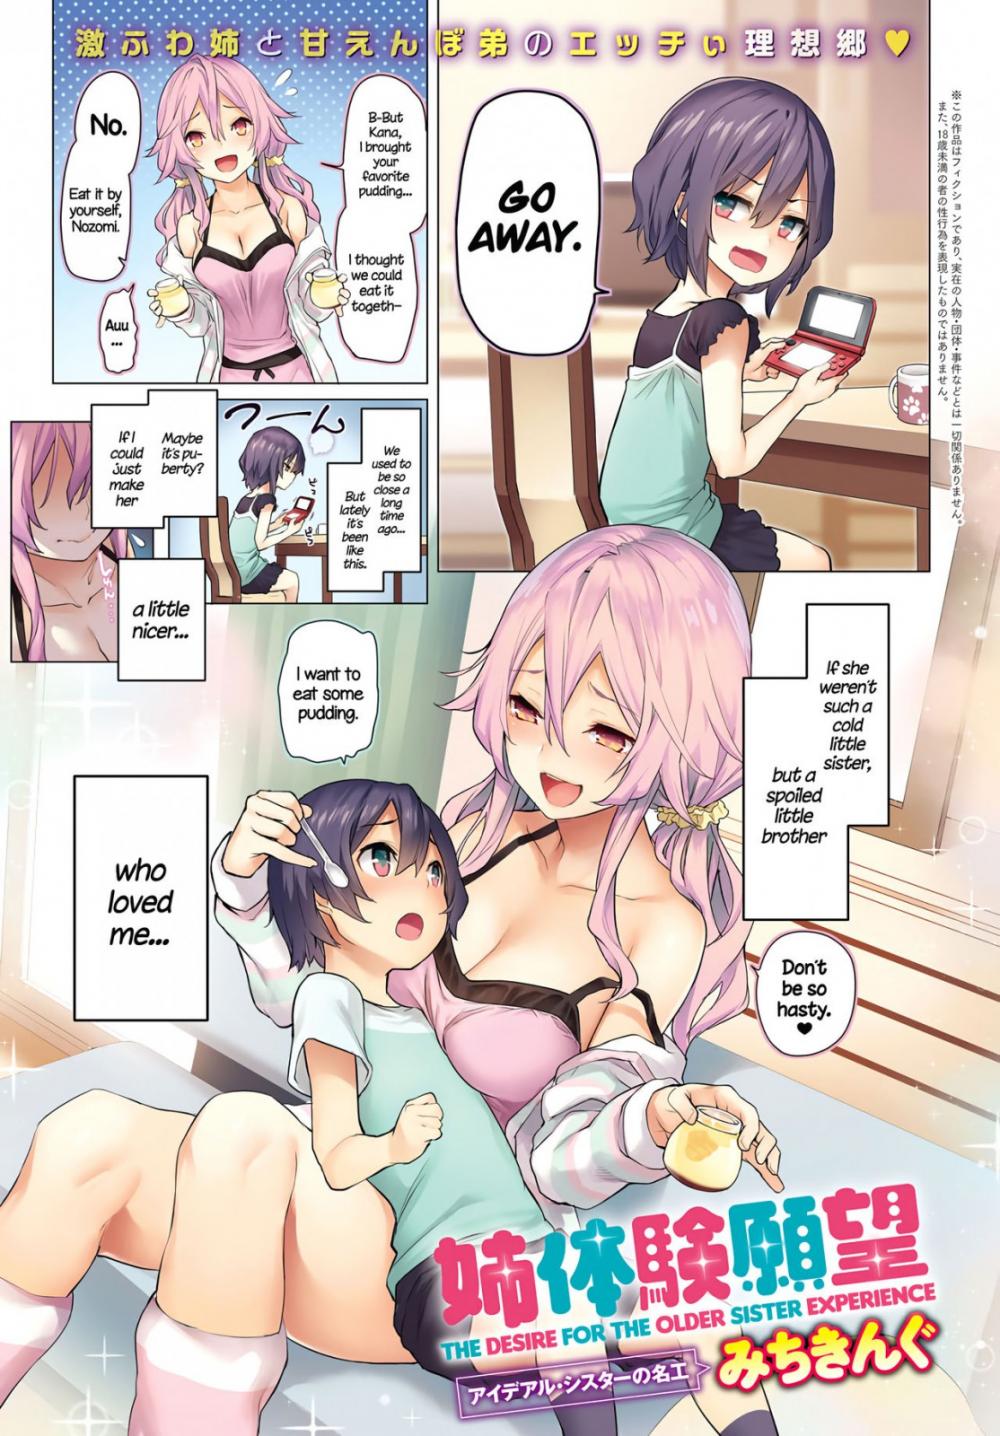 Hentai Manga Comic-The Desire For The Older Sister Experience-Read-1